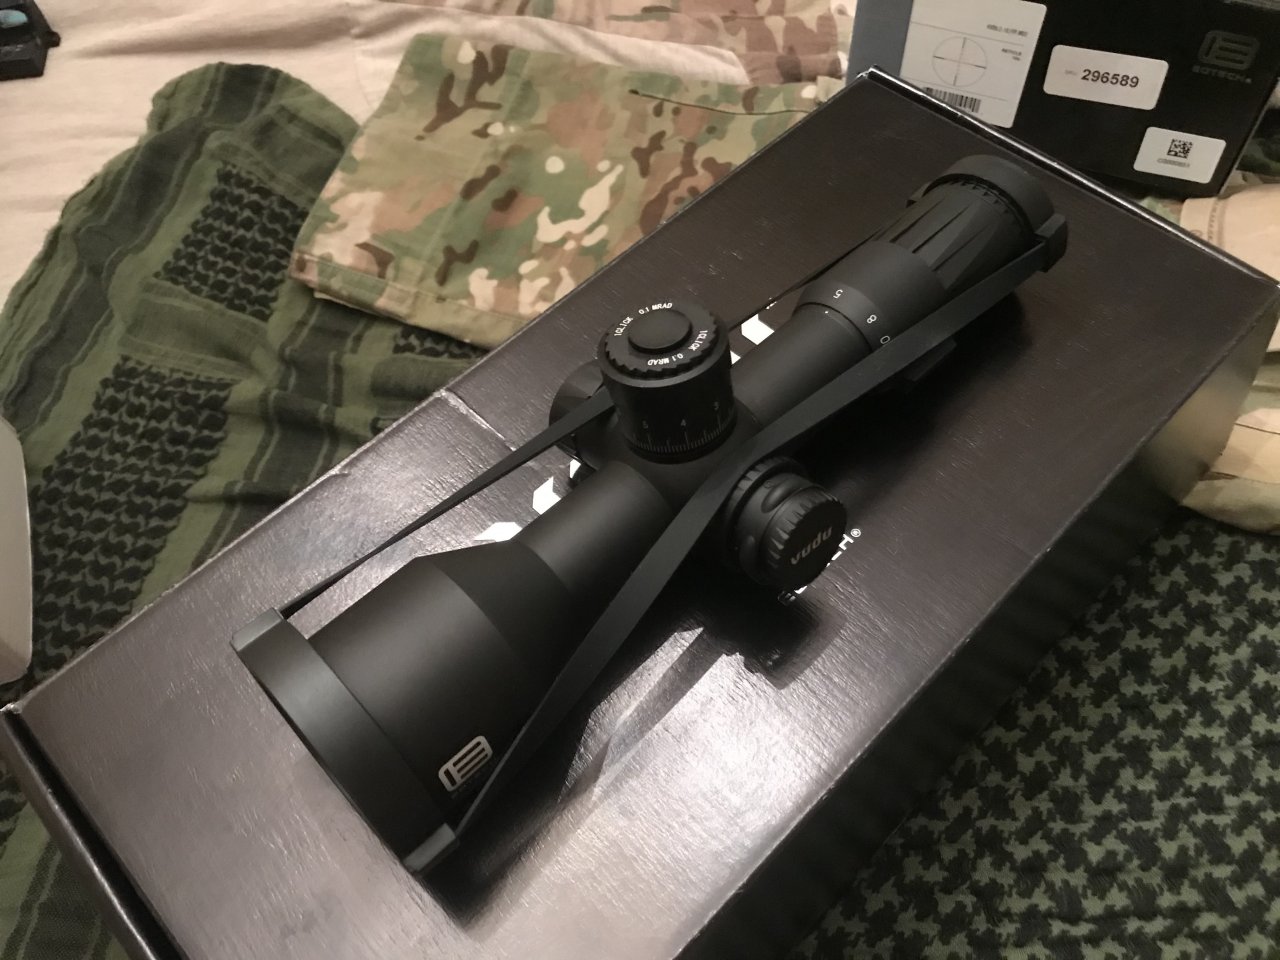 EOTech VUDU - 5-25X50 - VDU5-25FFMD3 - It has the MD3 Ret Brand New, Box and Paperwork - $1750